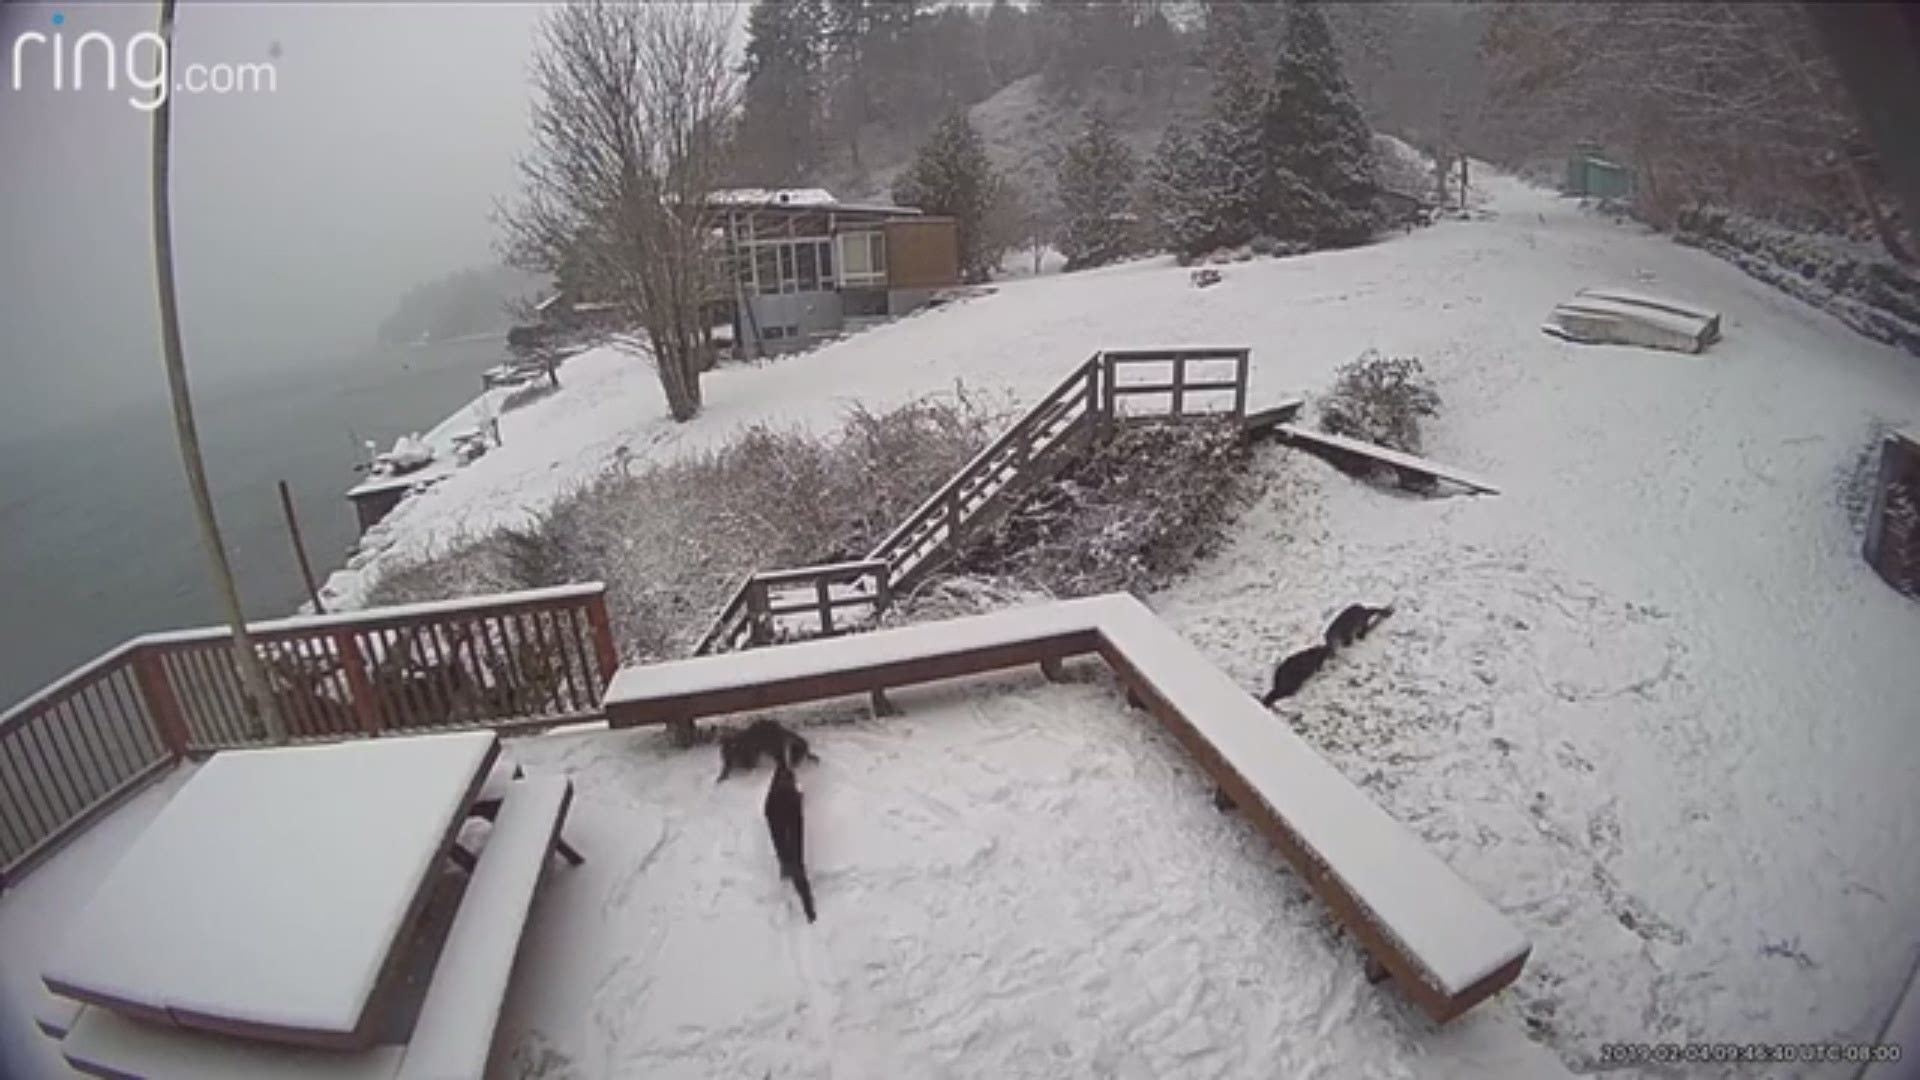 A doorbell camera caught these otters playing in the snow on Vashon Island! Thanks to Pam Brossard for sharing.